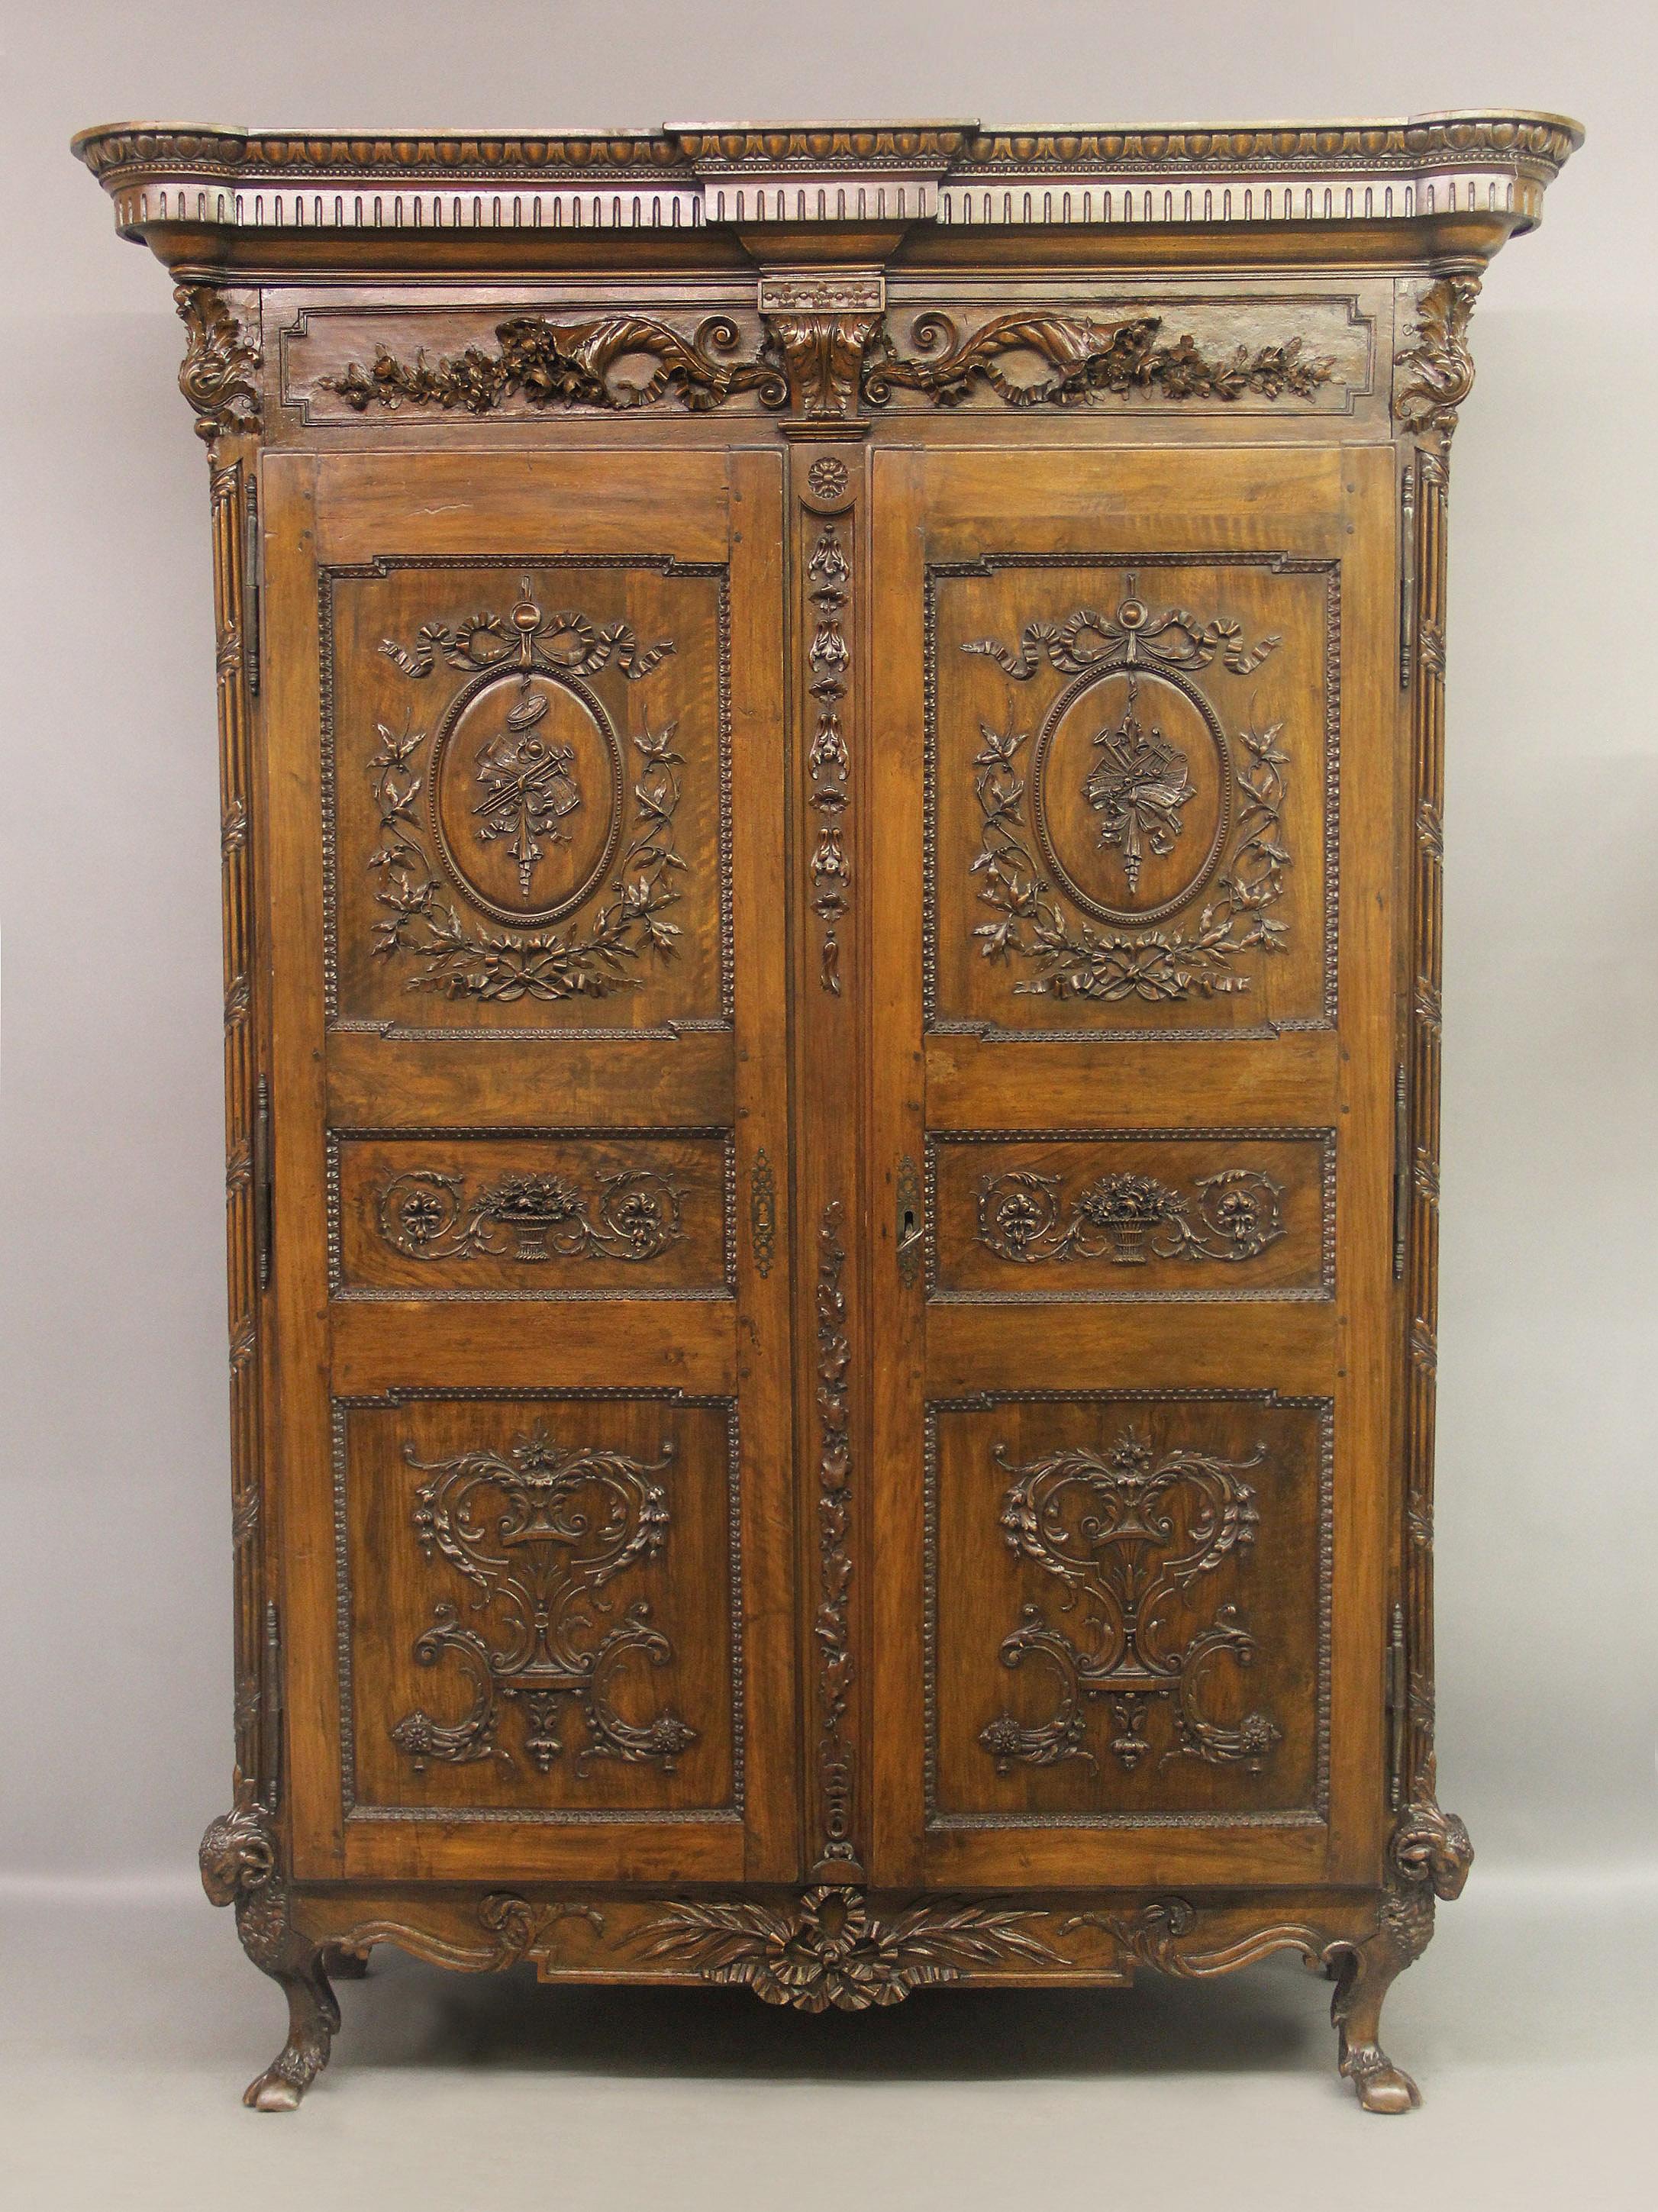 A palatial and very fine late 18th century Louis XVI hand carved walnut and mahogany armoire

The country French cabinet with a rectangular cornice above a pair of large doors raised on short cabriole legs surmounted by ram's heads and hooves. The